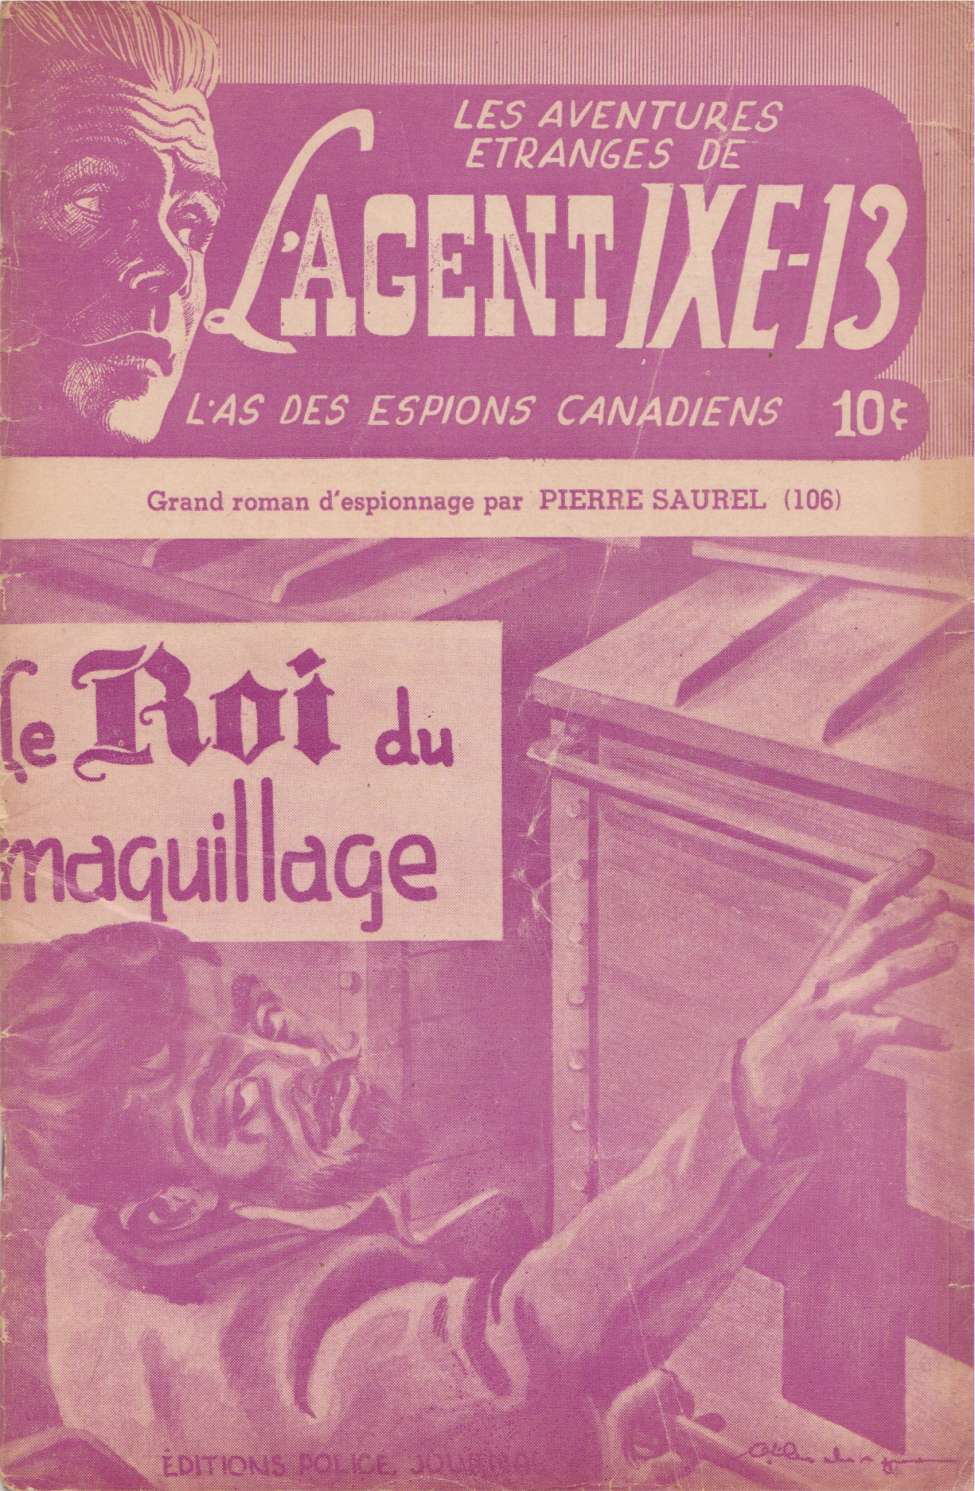 Comic Book Cover For L'Agent IXE-13 v2 106 - Le roi du maquillage